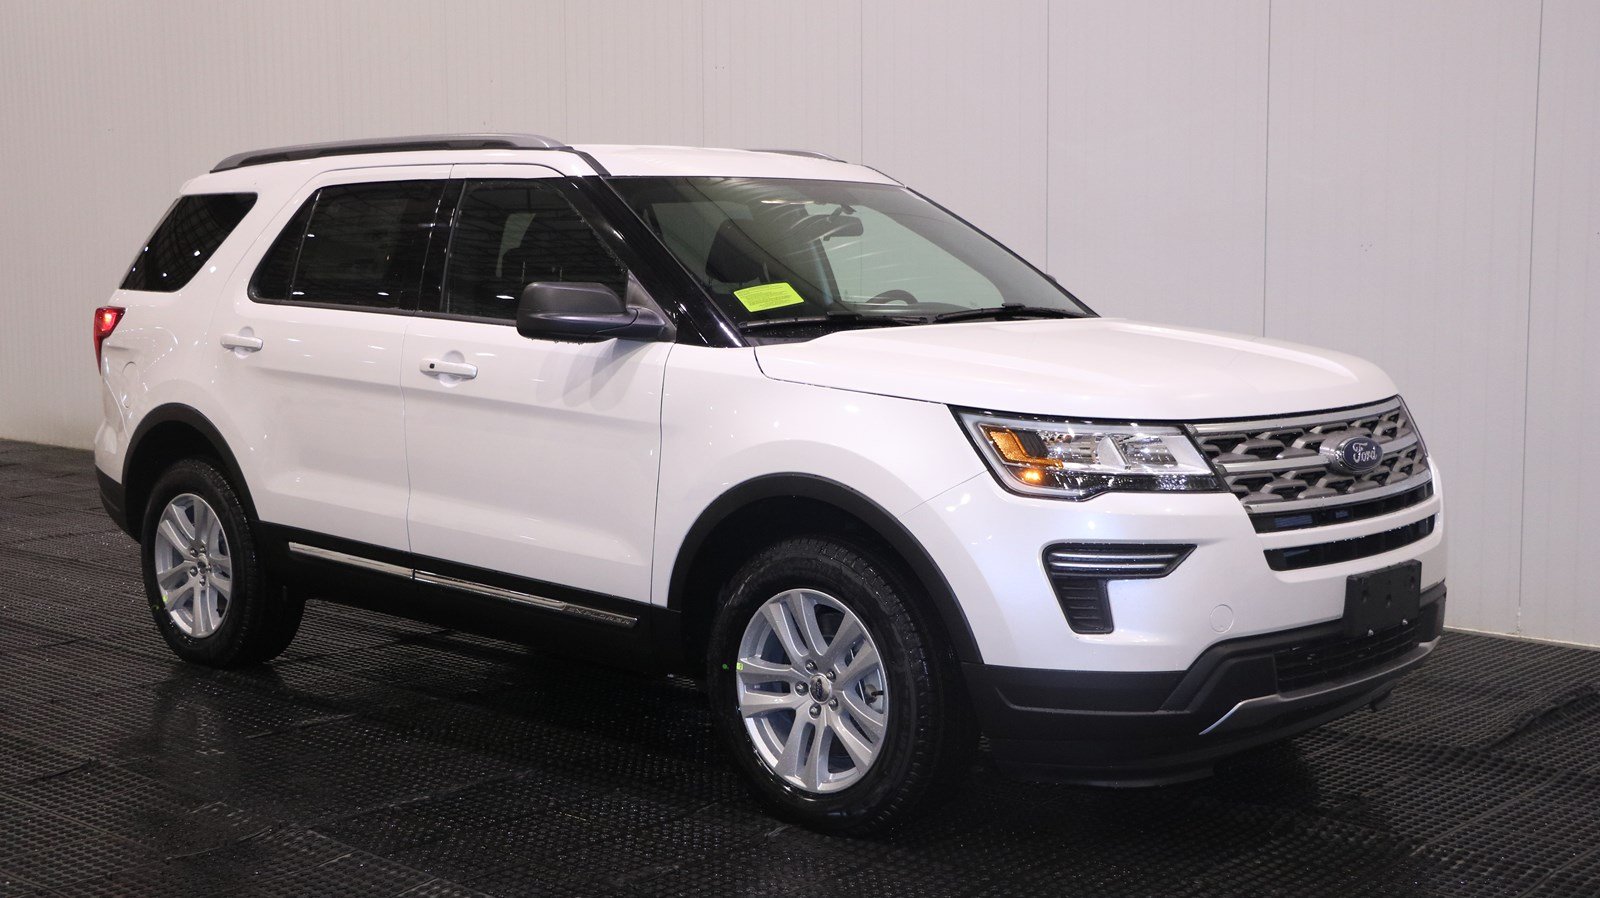 New 2018 Ford Explorer XLT in Quincy #F106668 | Quirk Ford